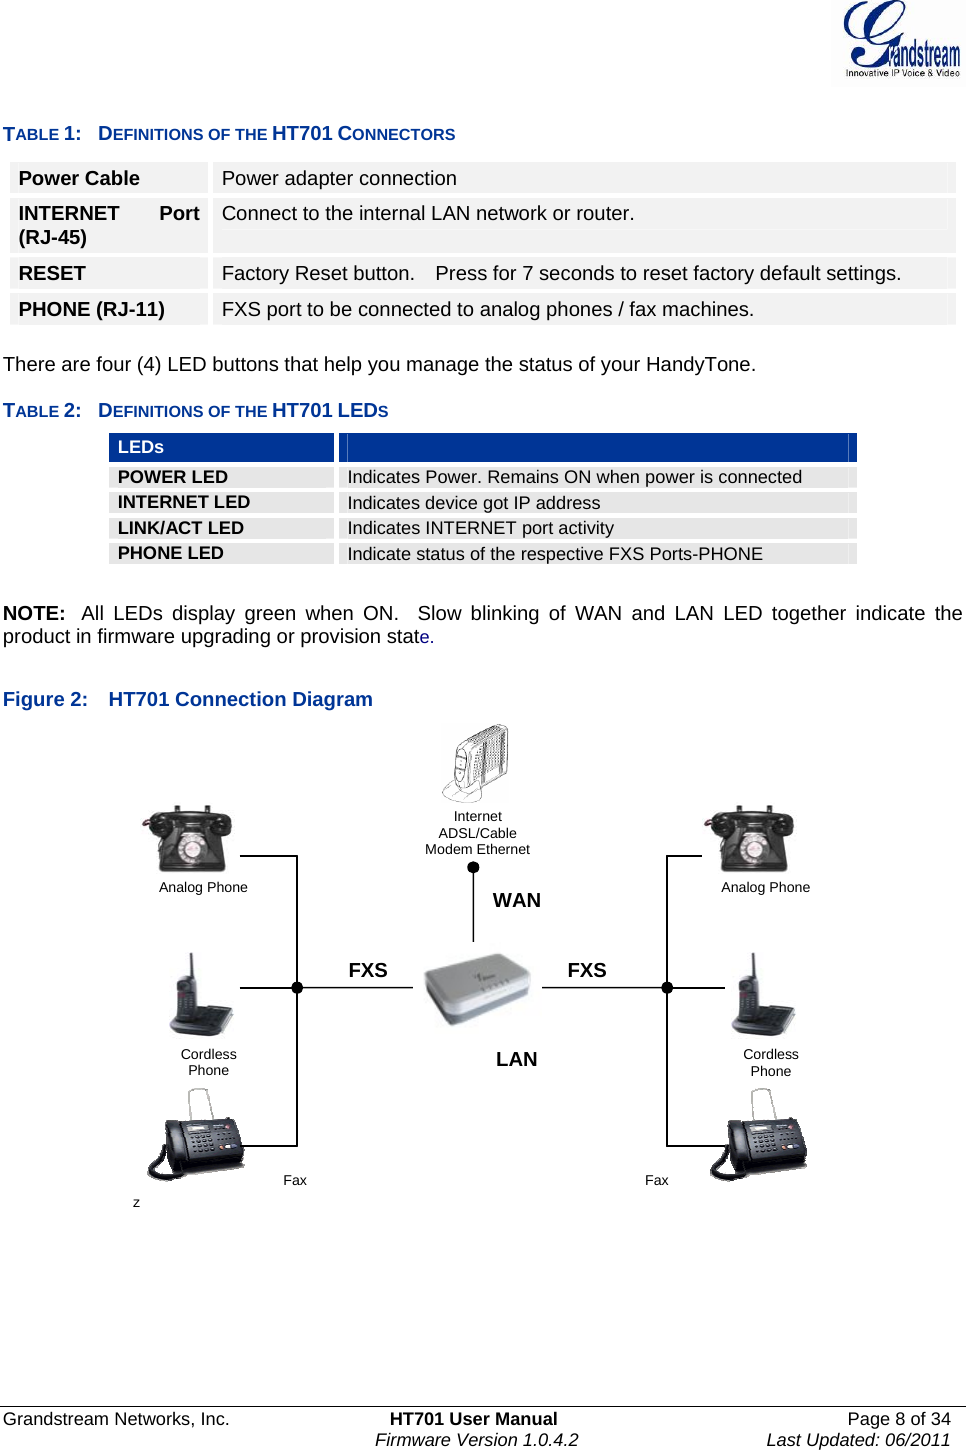  Grandstream Networks, Inc.  HT701 User Manual  Page 8 of 34     Firmware Version 1.0.4.2  Last Updated: 06/2011   TABLE 1:  DEFINITIONS OF THE HT701 CONNECTORS Power Cable  Power adapter connection INTERNET Port (RJ-45)  Connect to the internal LAN network or router. RESET  Factory Reset button.    Press for 7 seconds to reset factory default settings. PHONE (RJ-11)  FXS port to be connected to analog phones / fax machines.  There are four (4) LED buttons that help you manage the status of your HandyTone.  TABLE 2:  DEFINITIONS OF THE HT701 LEDS LEDs    POWER LED  Indicates Power. Remains ON when power is connected INTERNET LED  Indicates device got IP address LINK/ACT LED    Indicates INTERNET port activity PHONE LED  Indicate status of the respective FXS Ports-PHONE  NOTE:   All LEDs display green when ON.  Slow blinking of WAN and LAN LED together indicate the product in firmware upgrading or provision state.  Figure 2:    HT701 Connection Diagram z  Internet ADSL/Cable Modem EthernetWAN LAN FXSFax Cordless PhoneAnalog Phone FXSFaxCordless PhoneAnalog Phone 